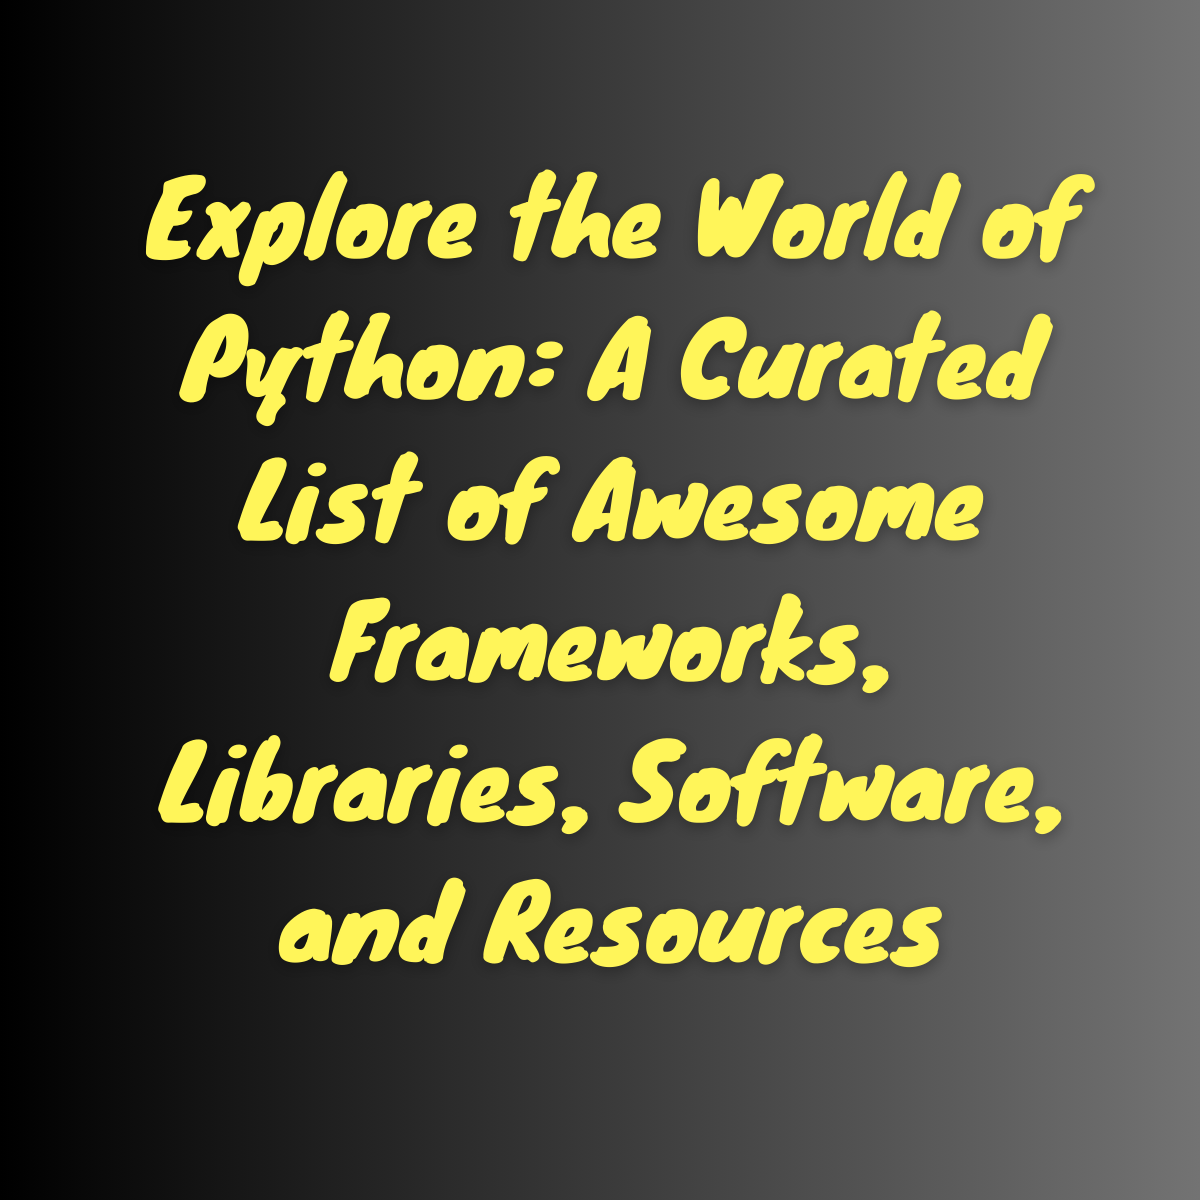 Explore the World of Python: A Curated List of Awesome Frameworks, Libraries, Software, and Resources